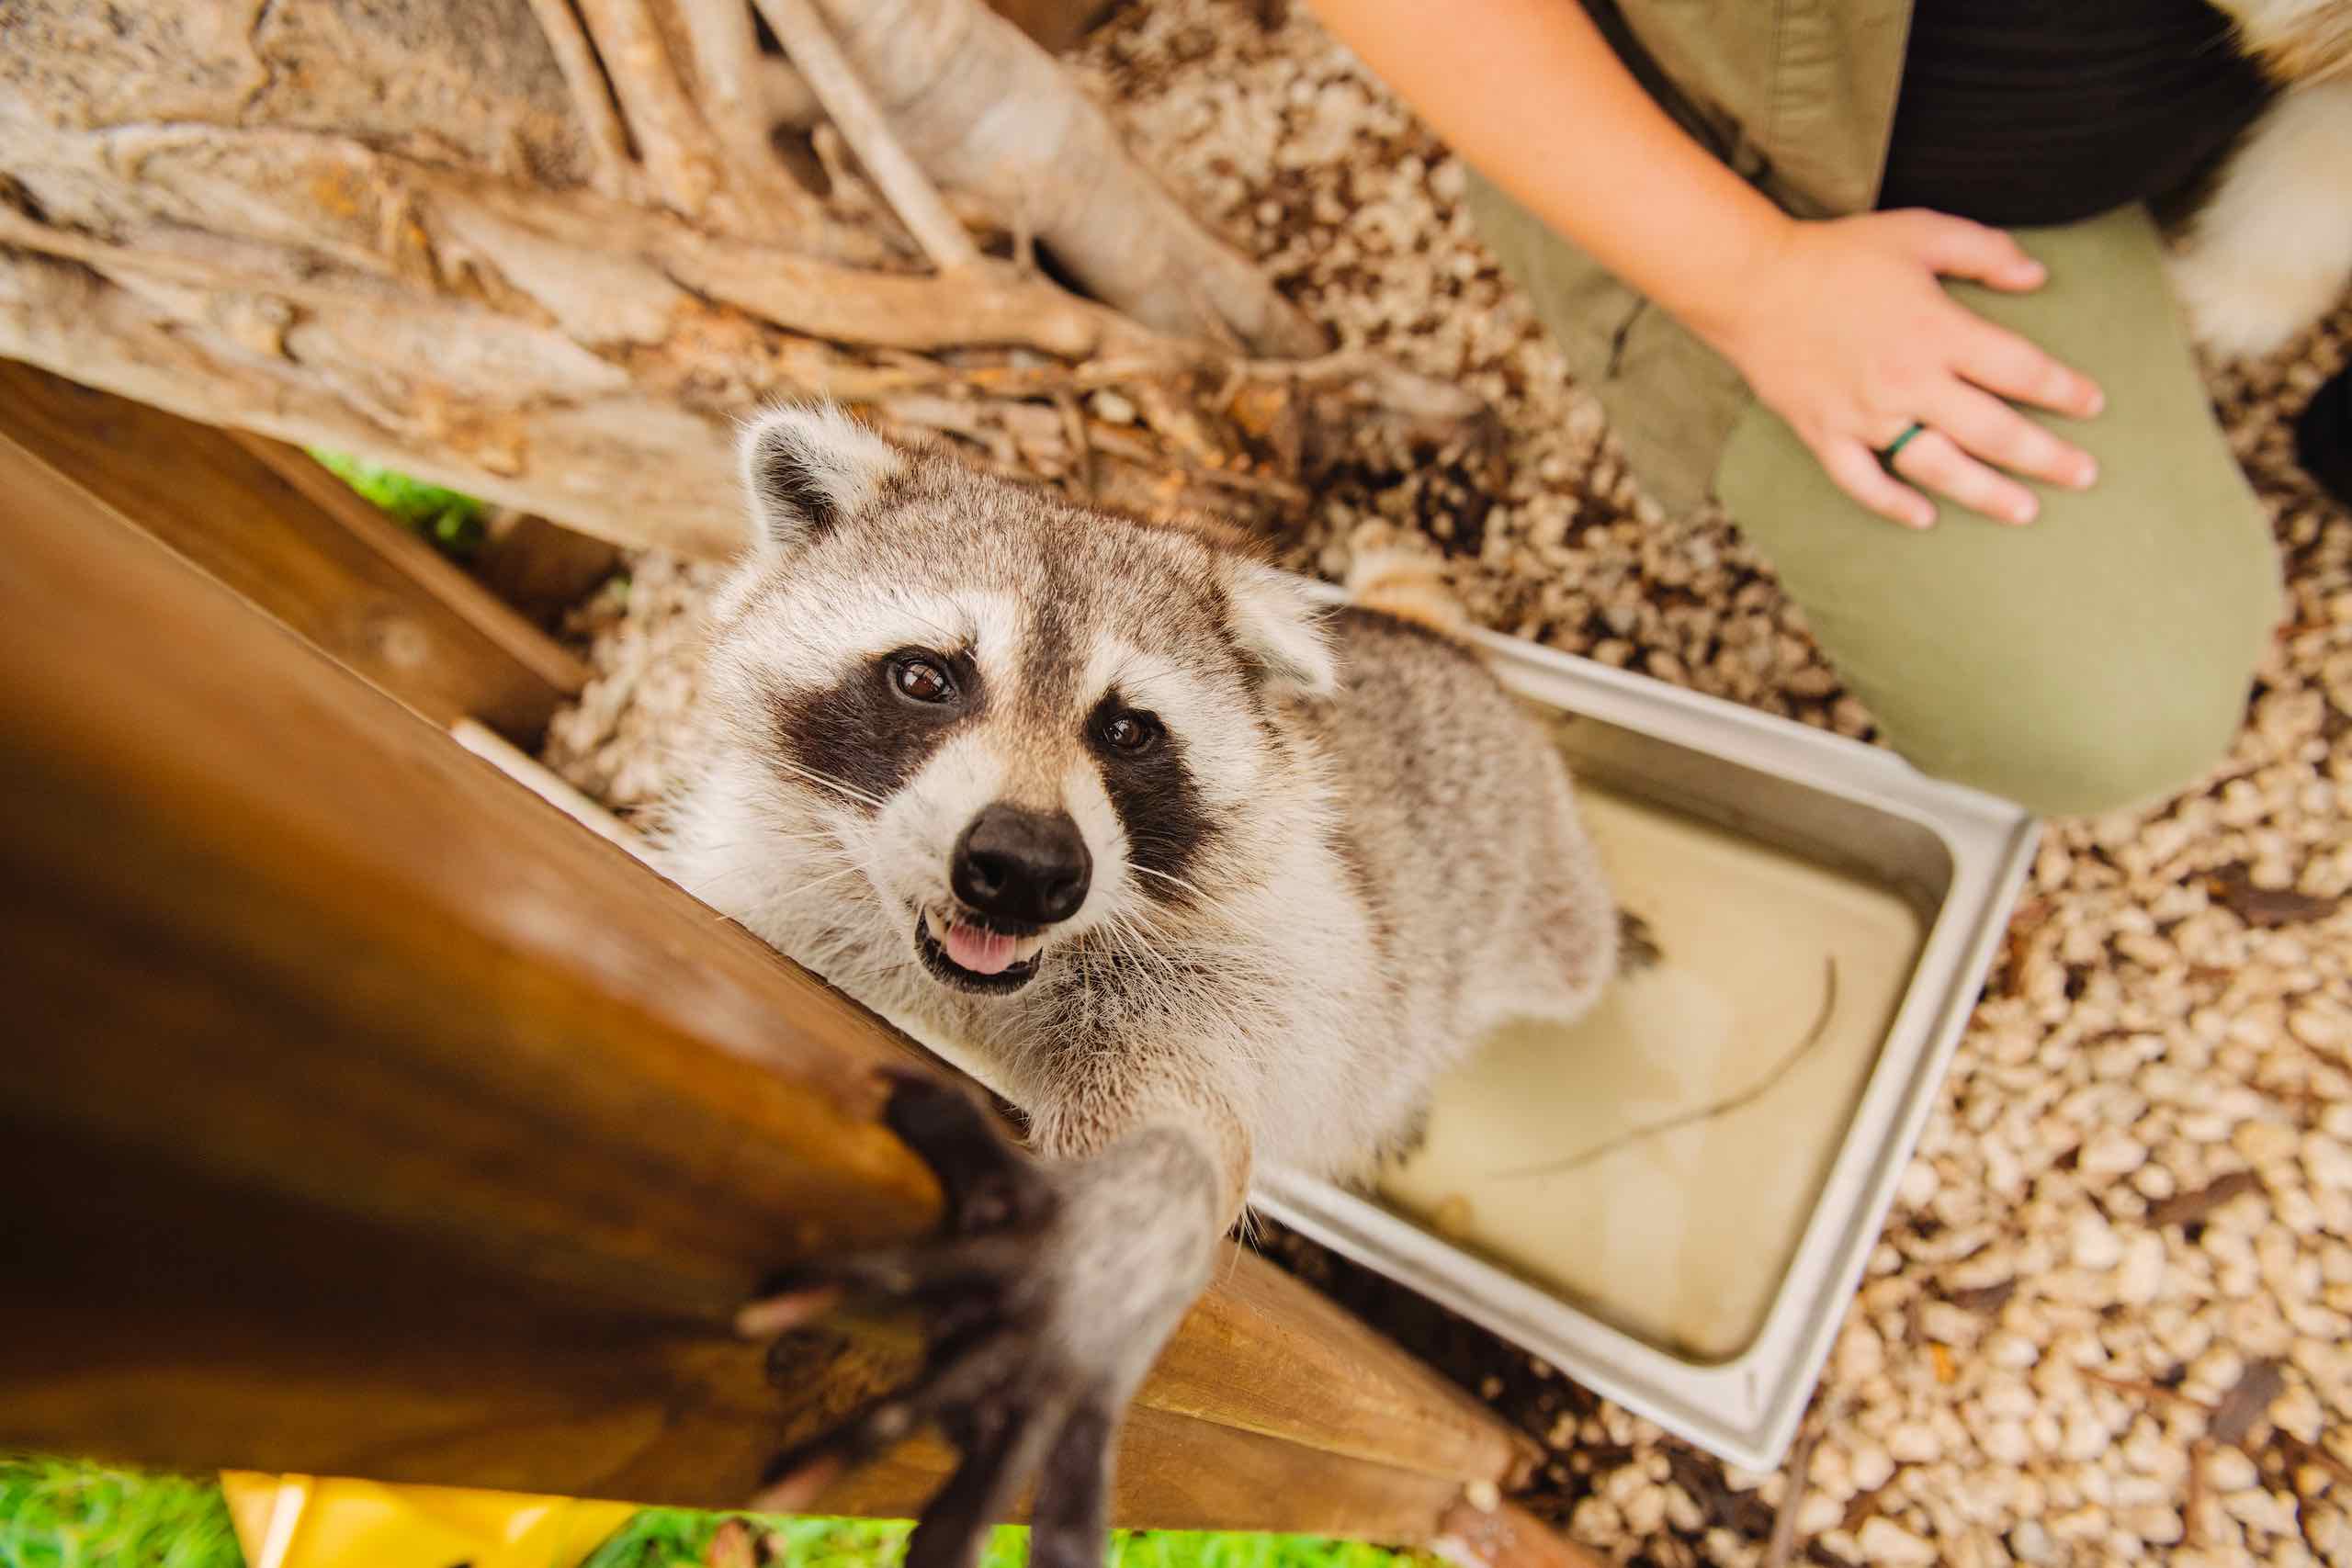 Everglades Holiday Park Closeup of raccoon looking at camera standing in a pan of water with the caretaker nearby